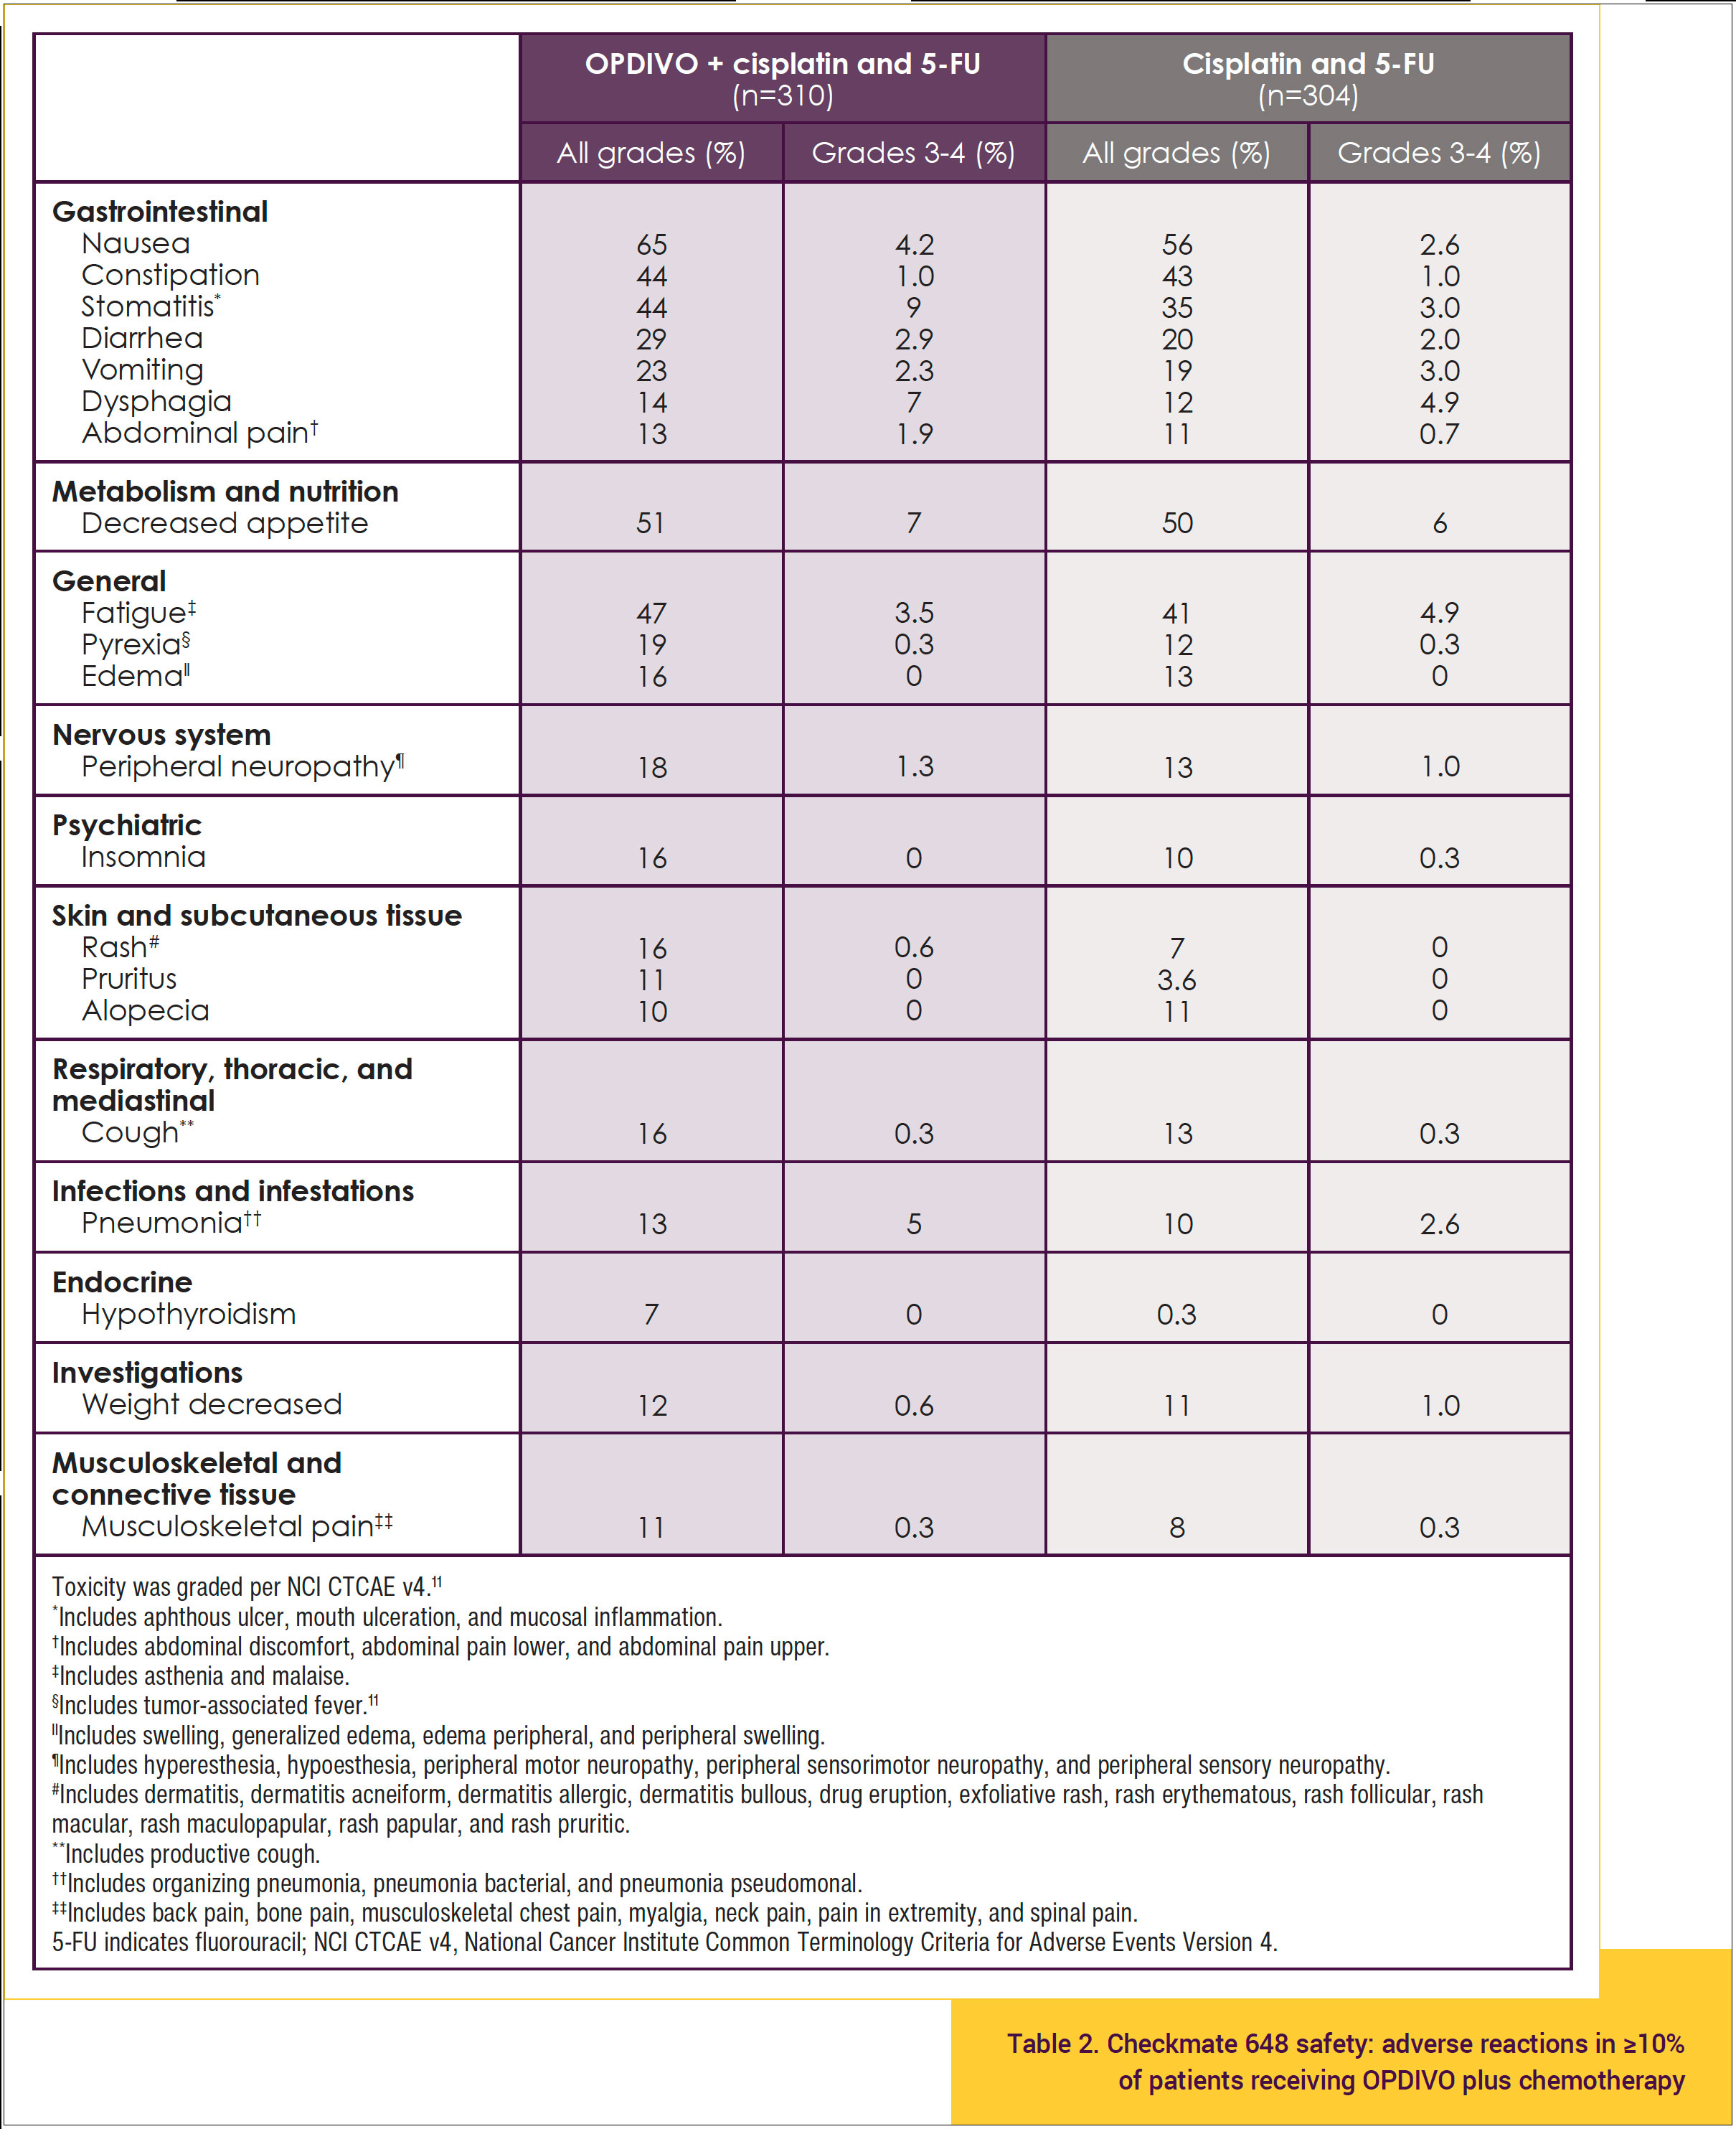 Table 2. Checkmate 648 safety: adverse reactions in ≥10% of patients receiving OPDIVO plus chemotherapy